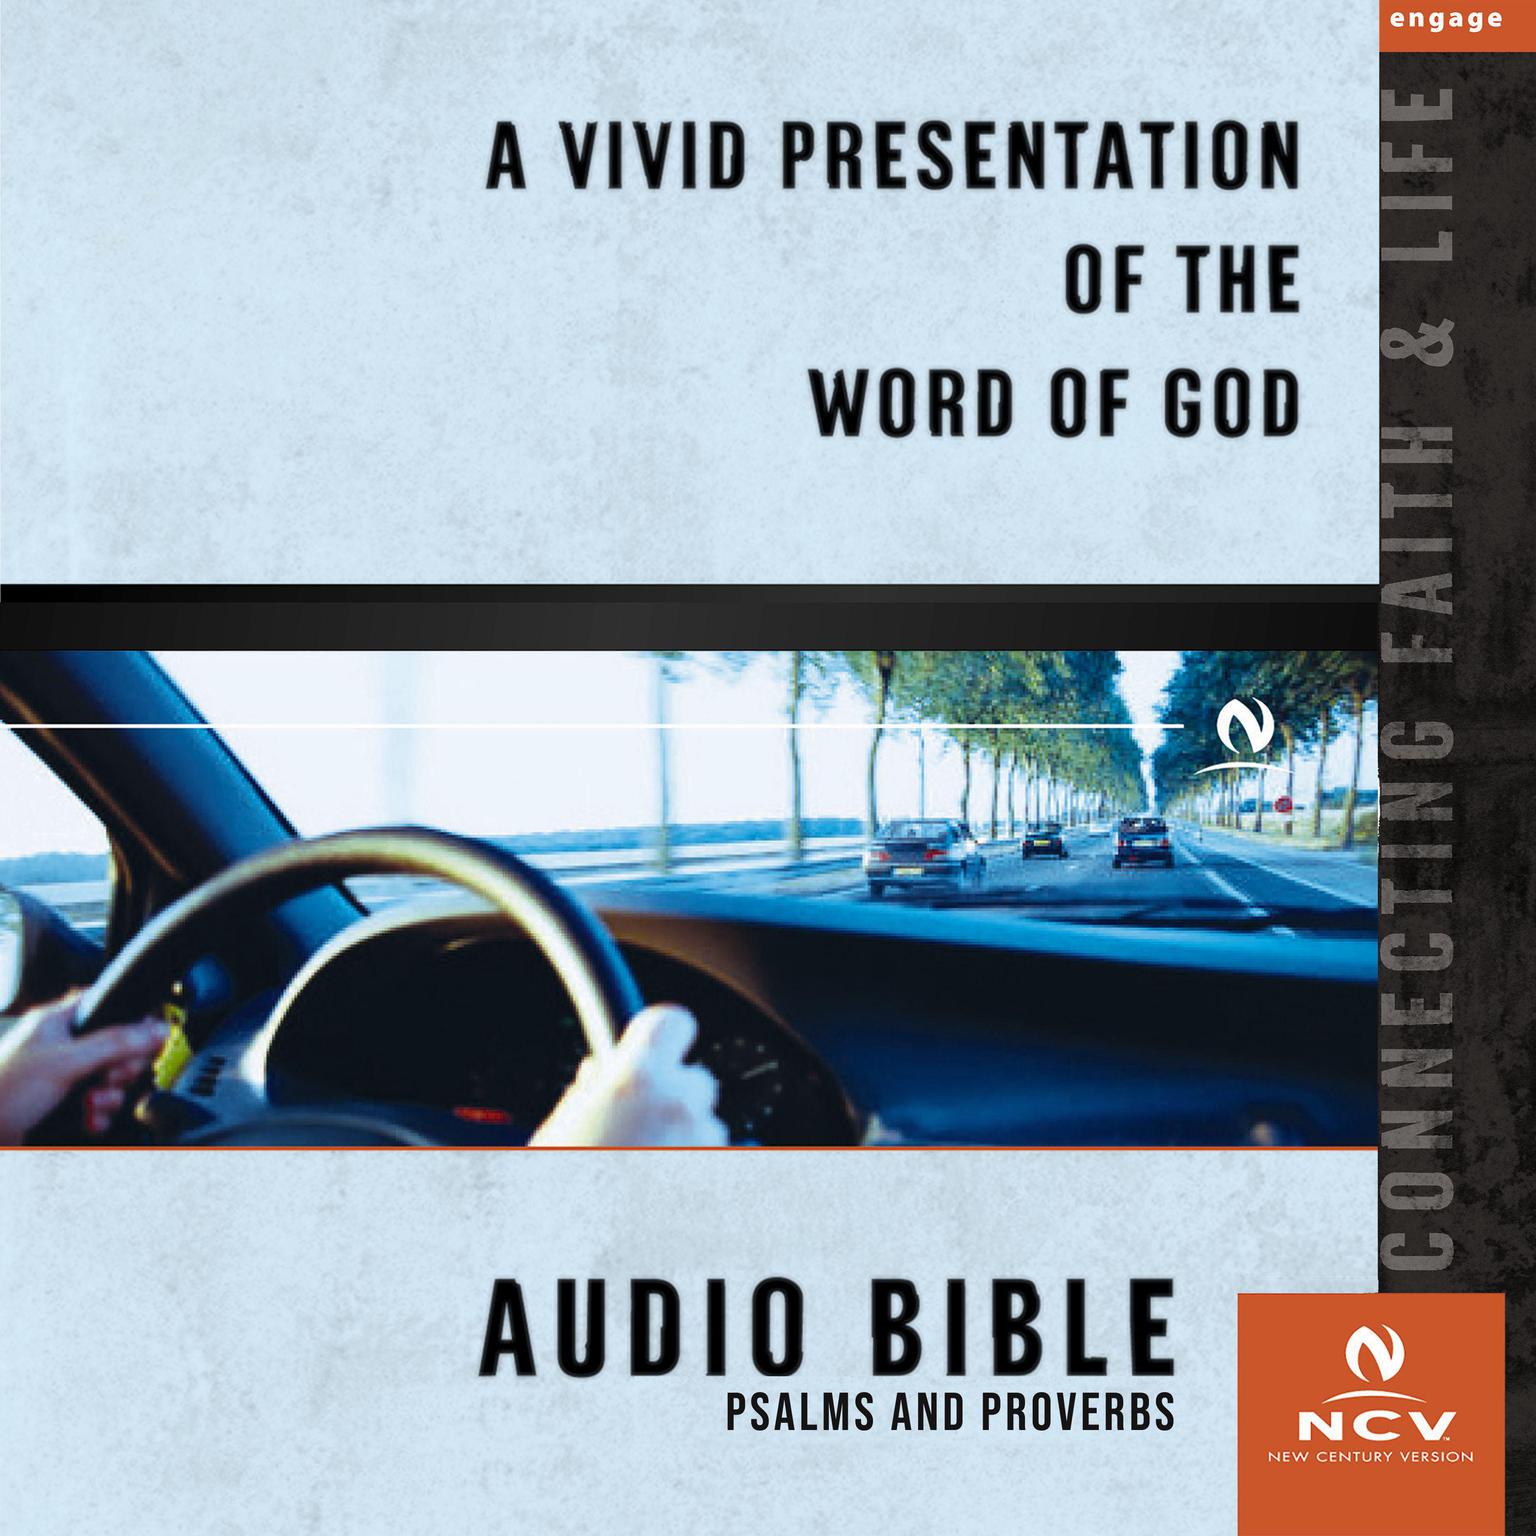 Audio Bible - New Century Version, NCV: Psalms and Proverbs Audiobook, by Thomas Nelson